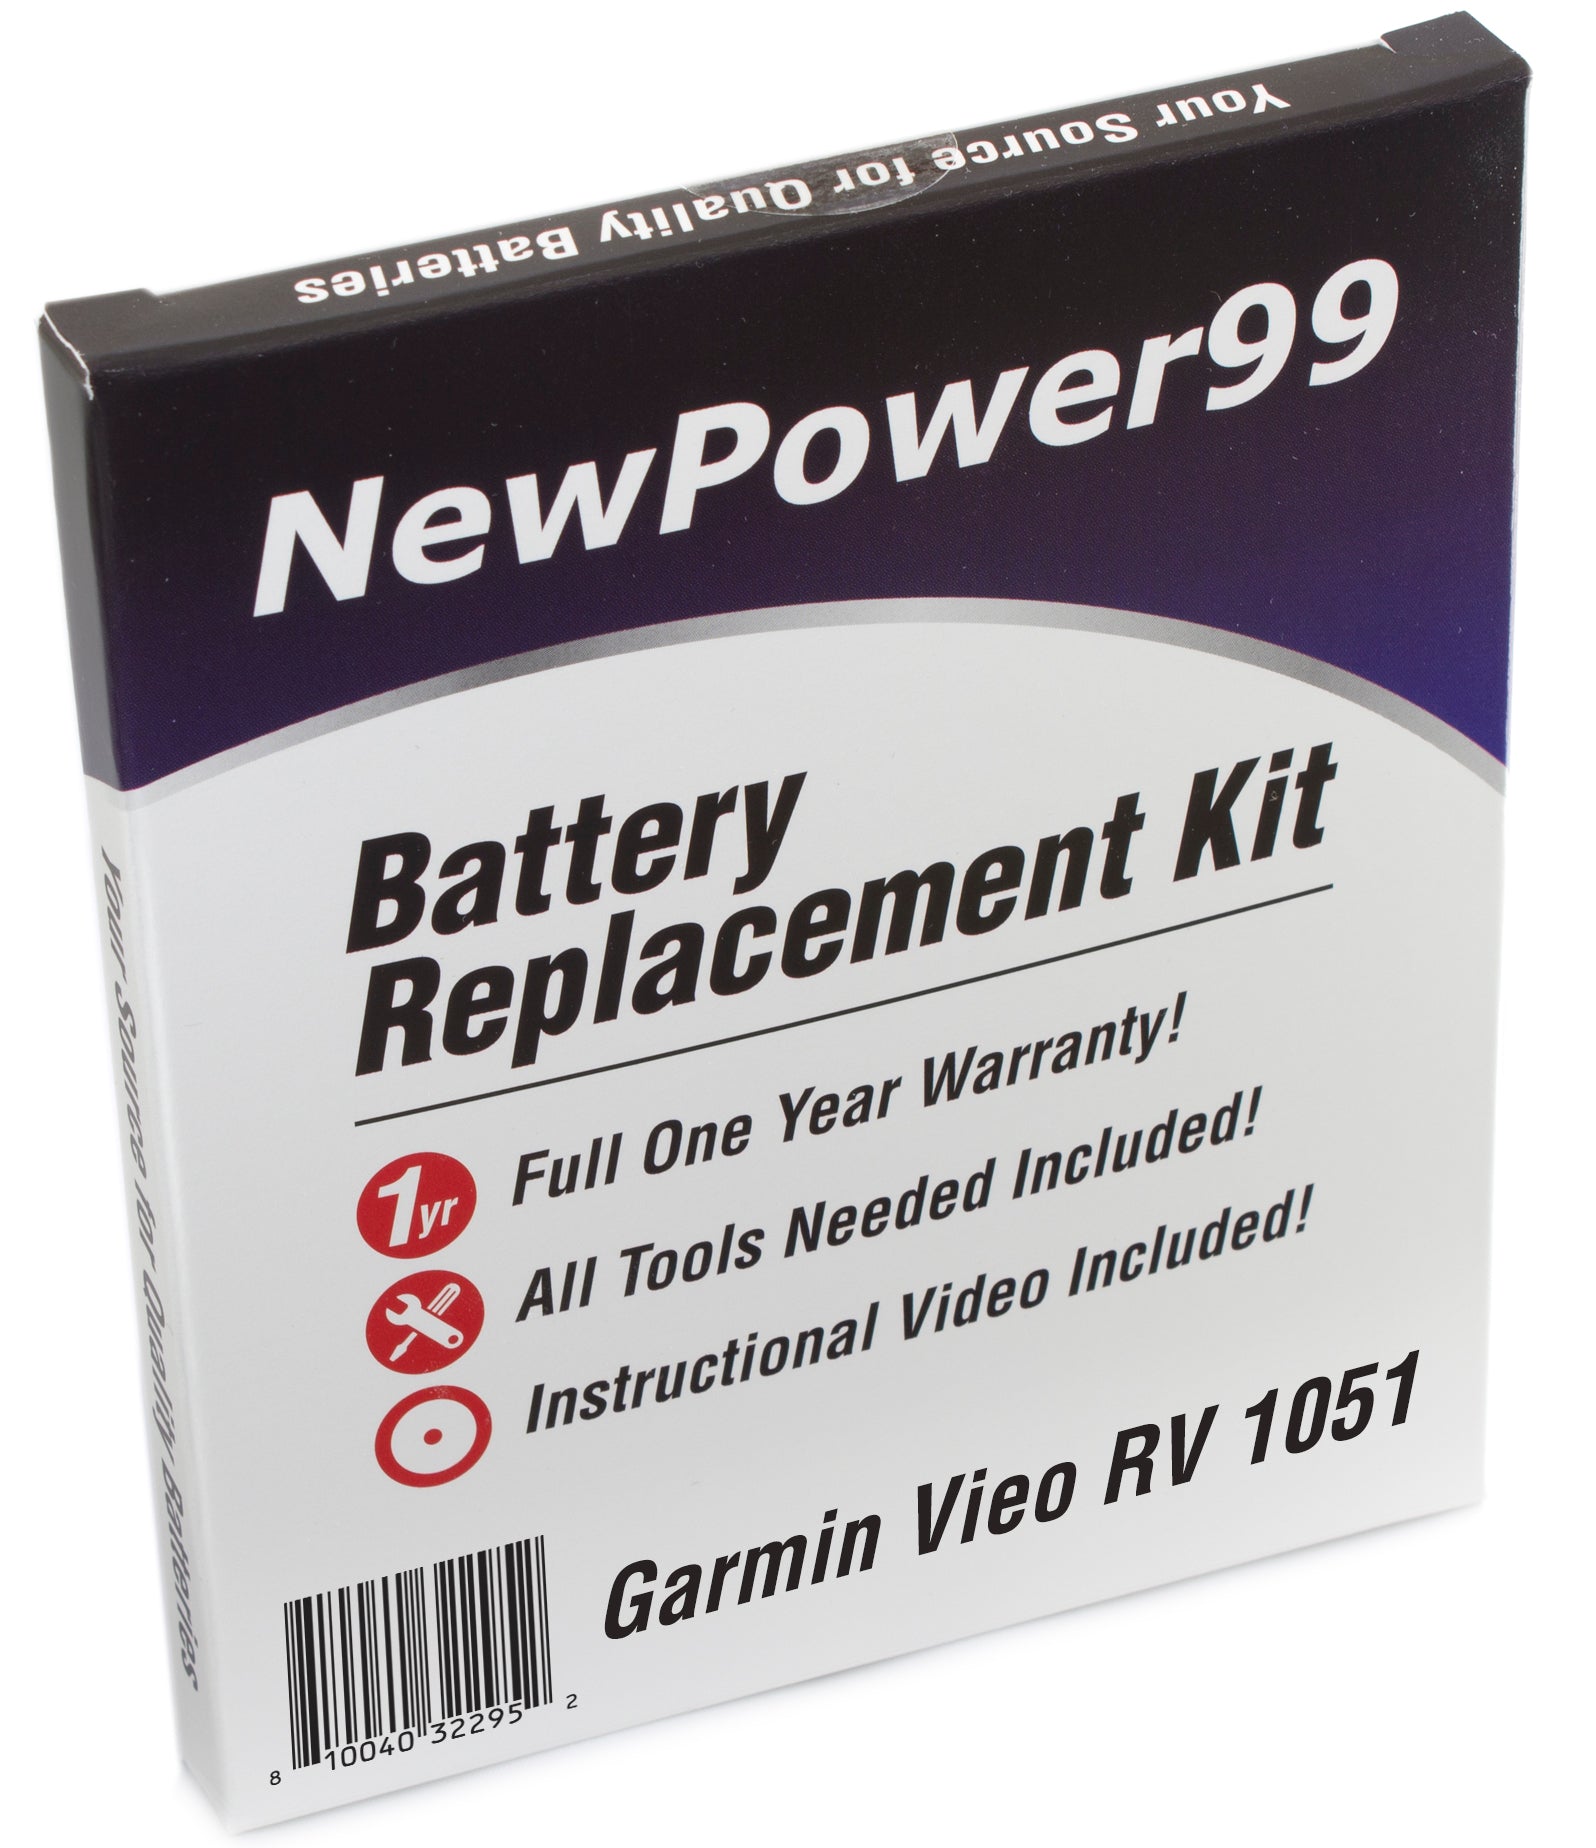 Garmin Vieo RV 1051 Battery Replacement Kit with Tools, Video Instructions and Extended Life Battery